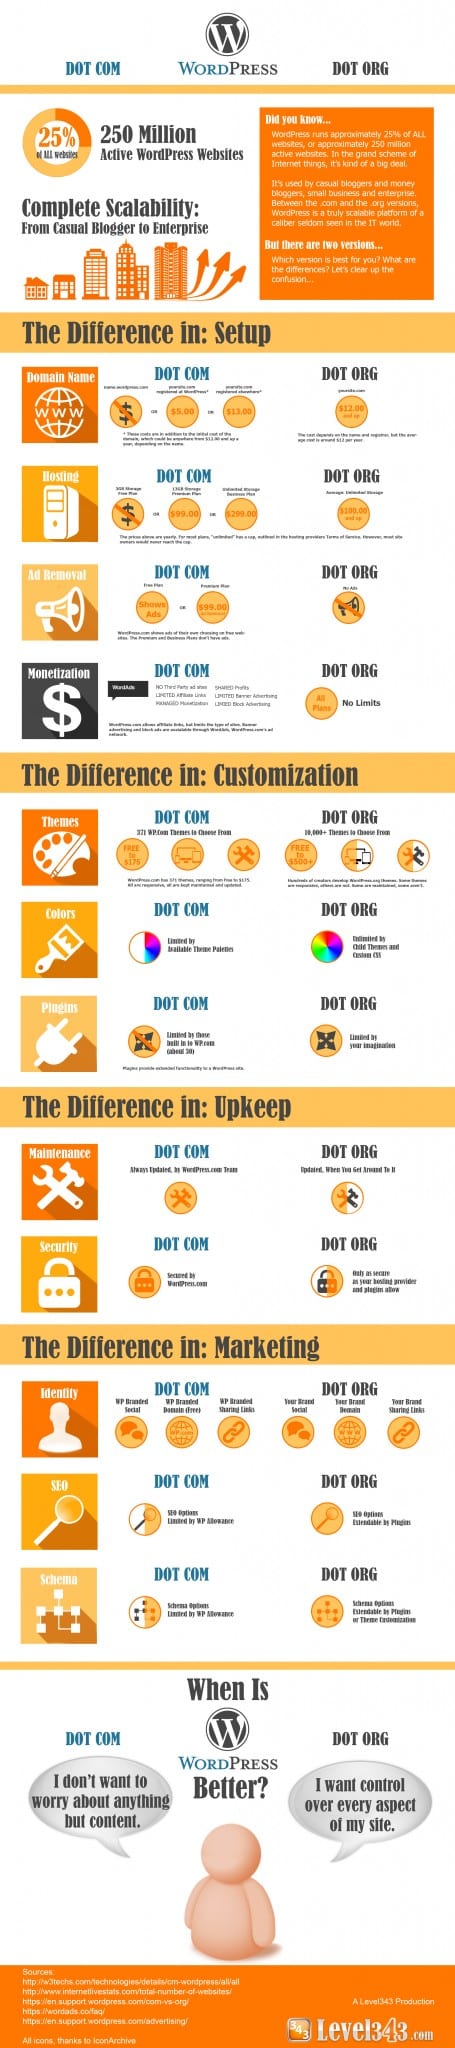 What's the difference between wordpress dot com and wordpress dot org - Infographic by Level343